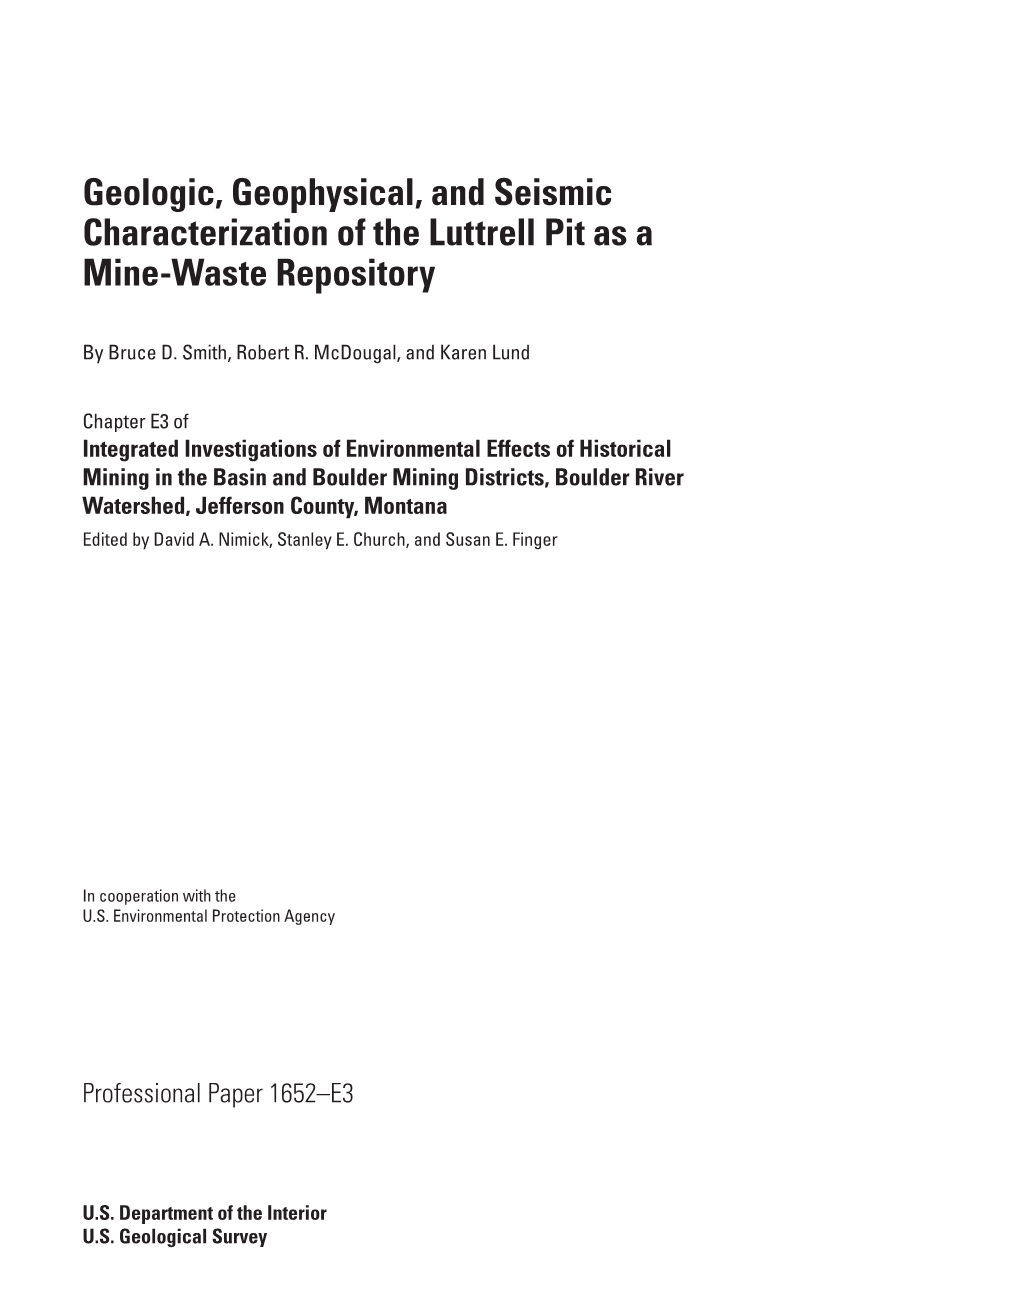 Geologic, Geophysical, and Seismic Characterization of the Luttrell Pit As a Mine-Waste Repository